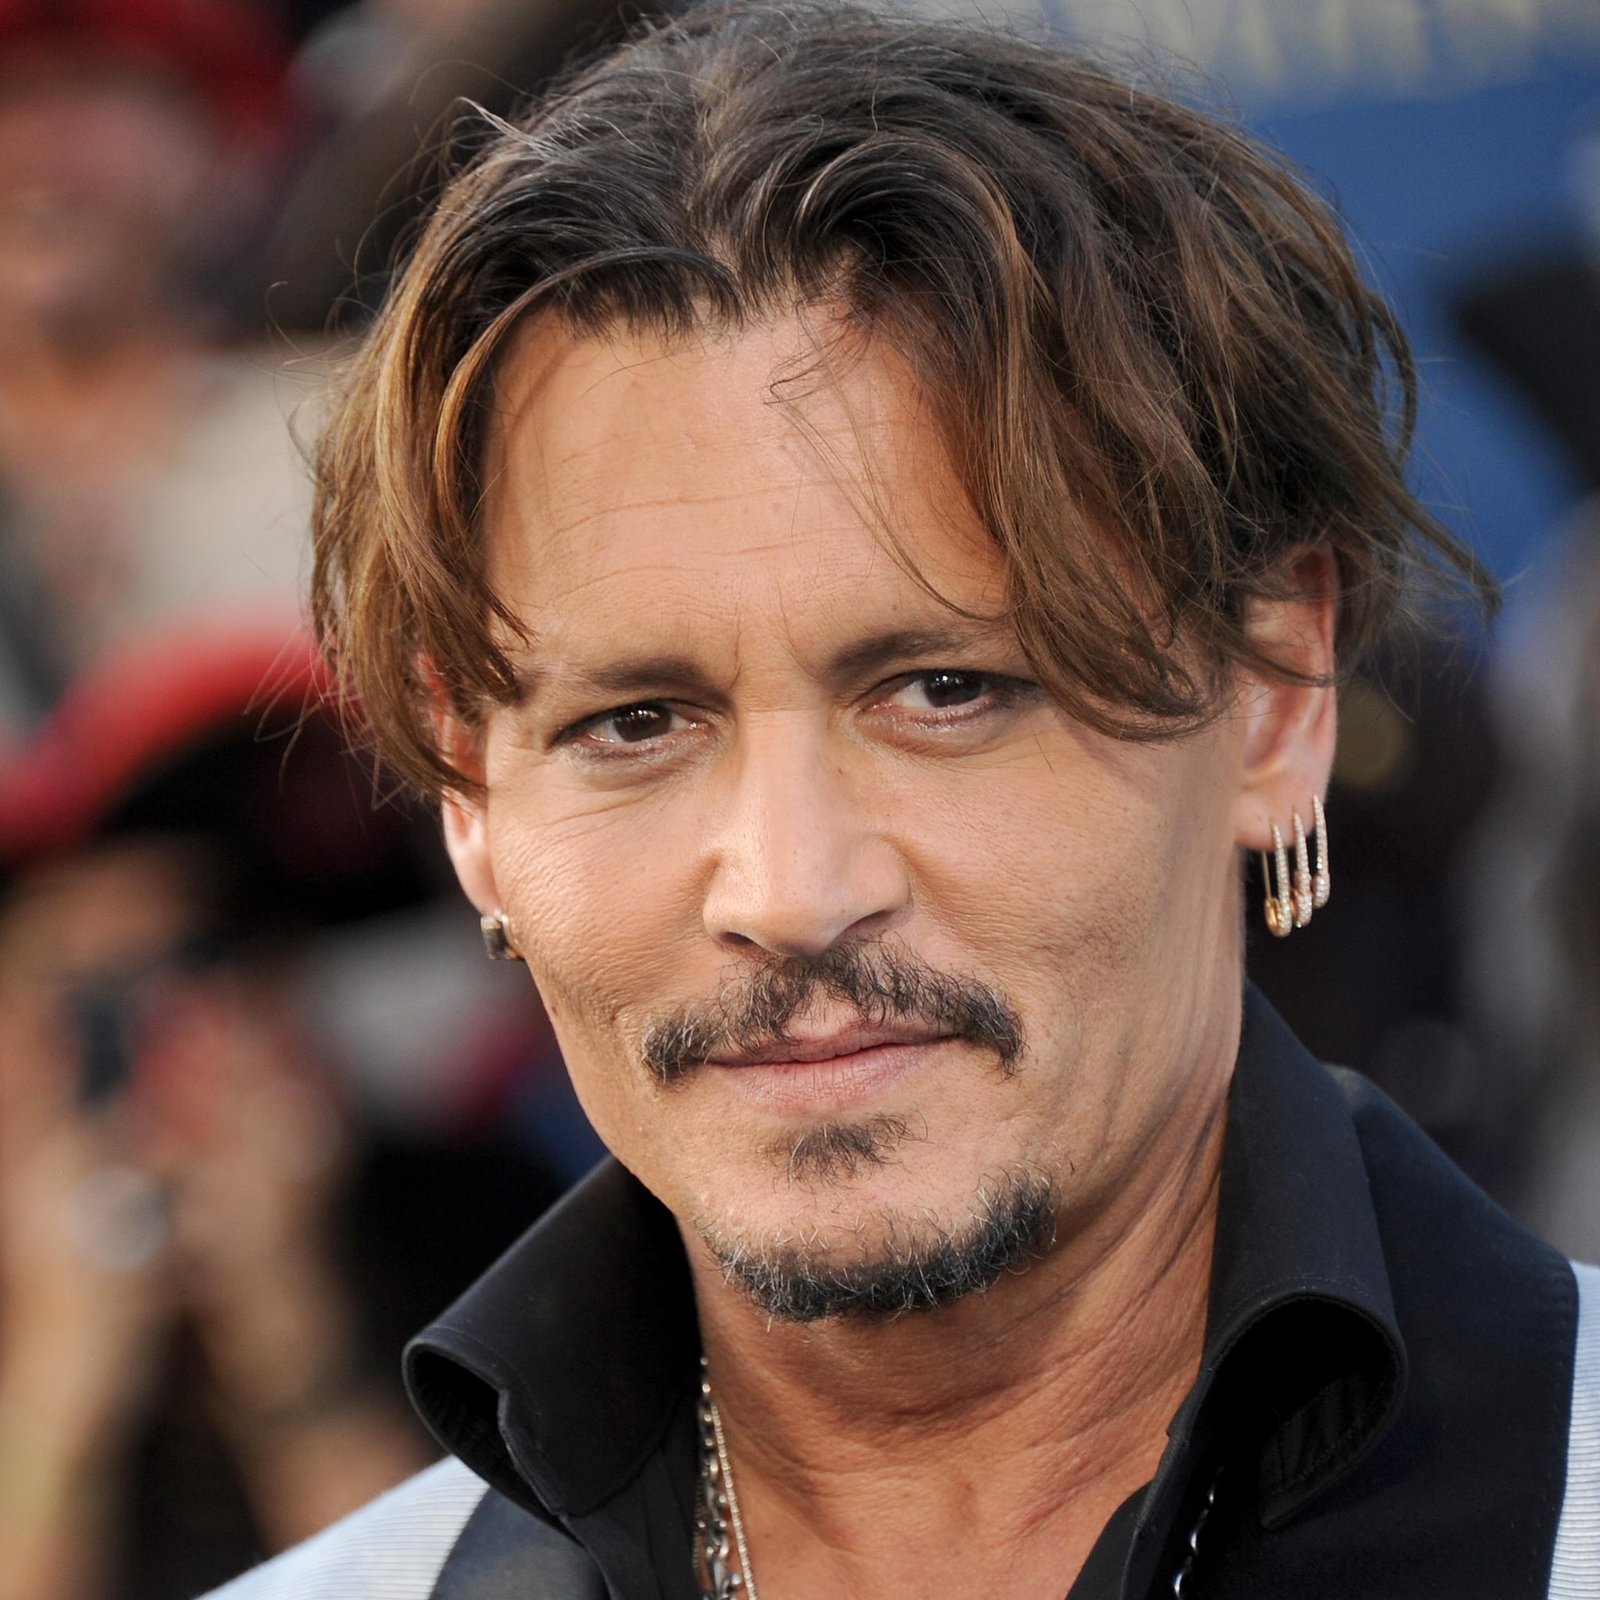 biography about johnny depp